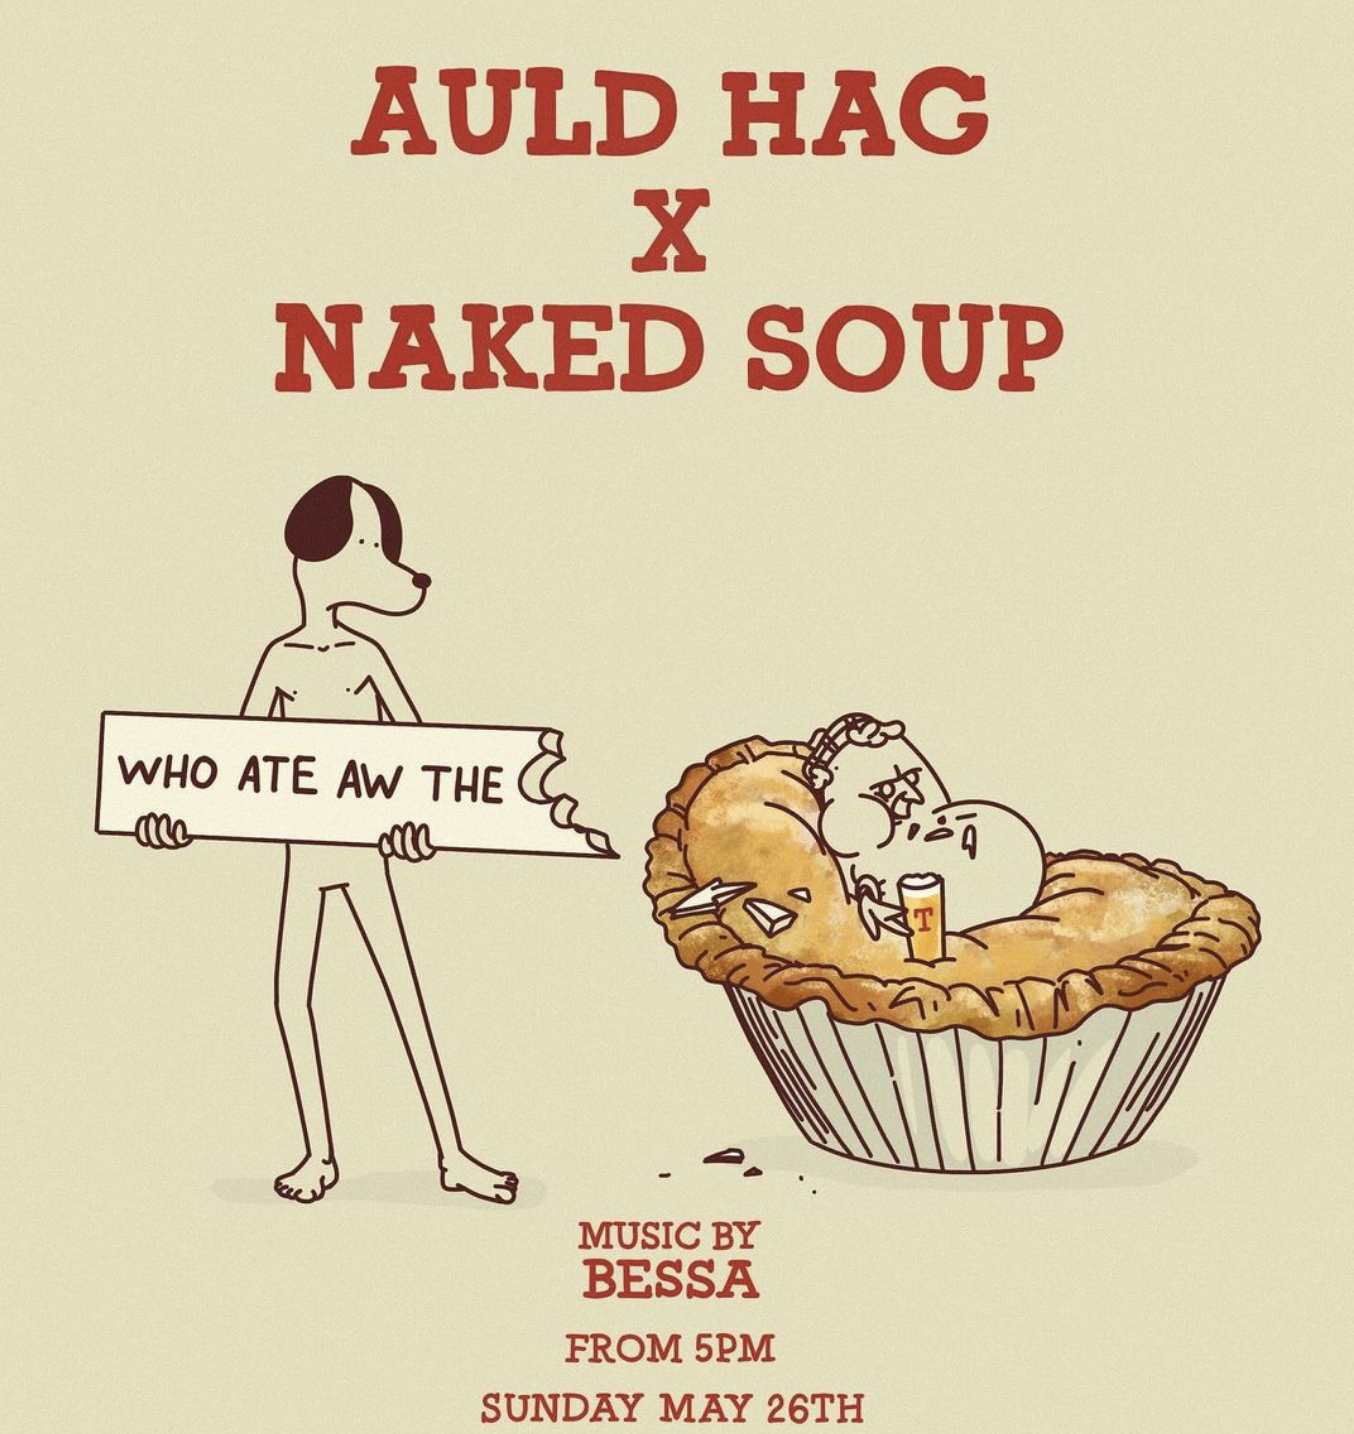 Poster for Auld Hag and Naked Soup event